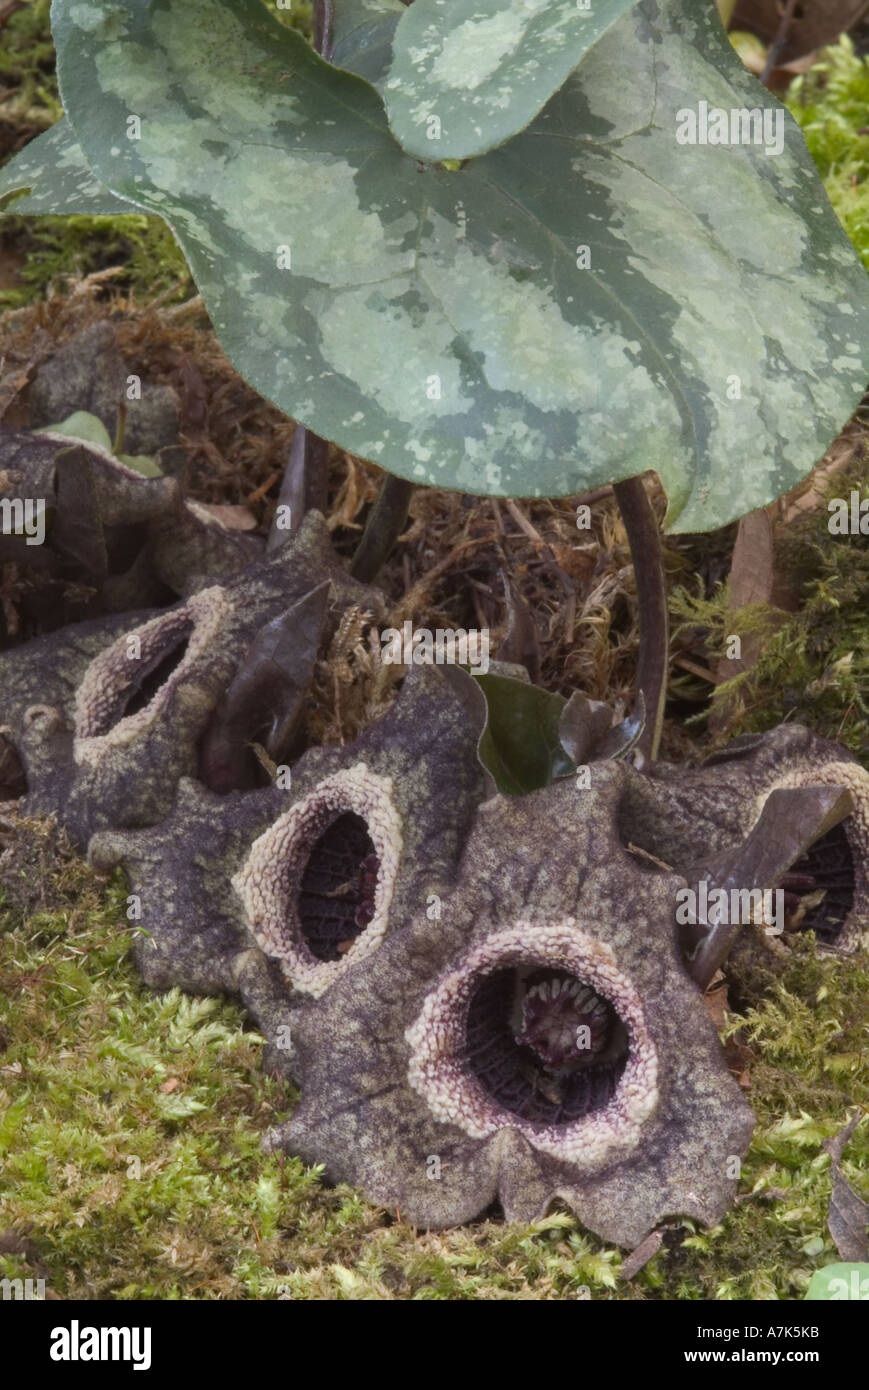 Asarum splendens, Chinois gingembre sauvage Banque D'Images